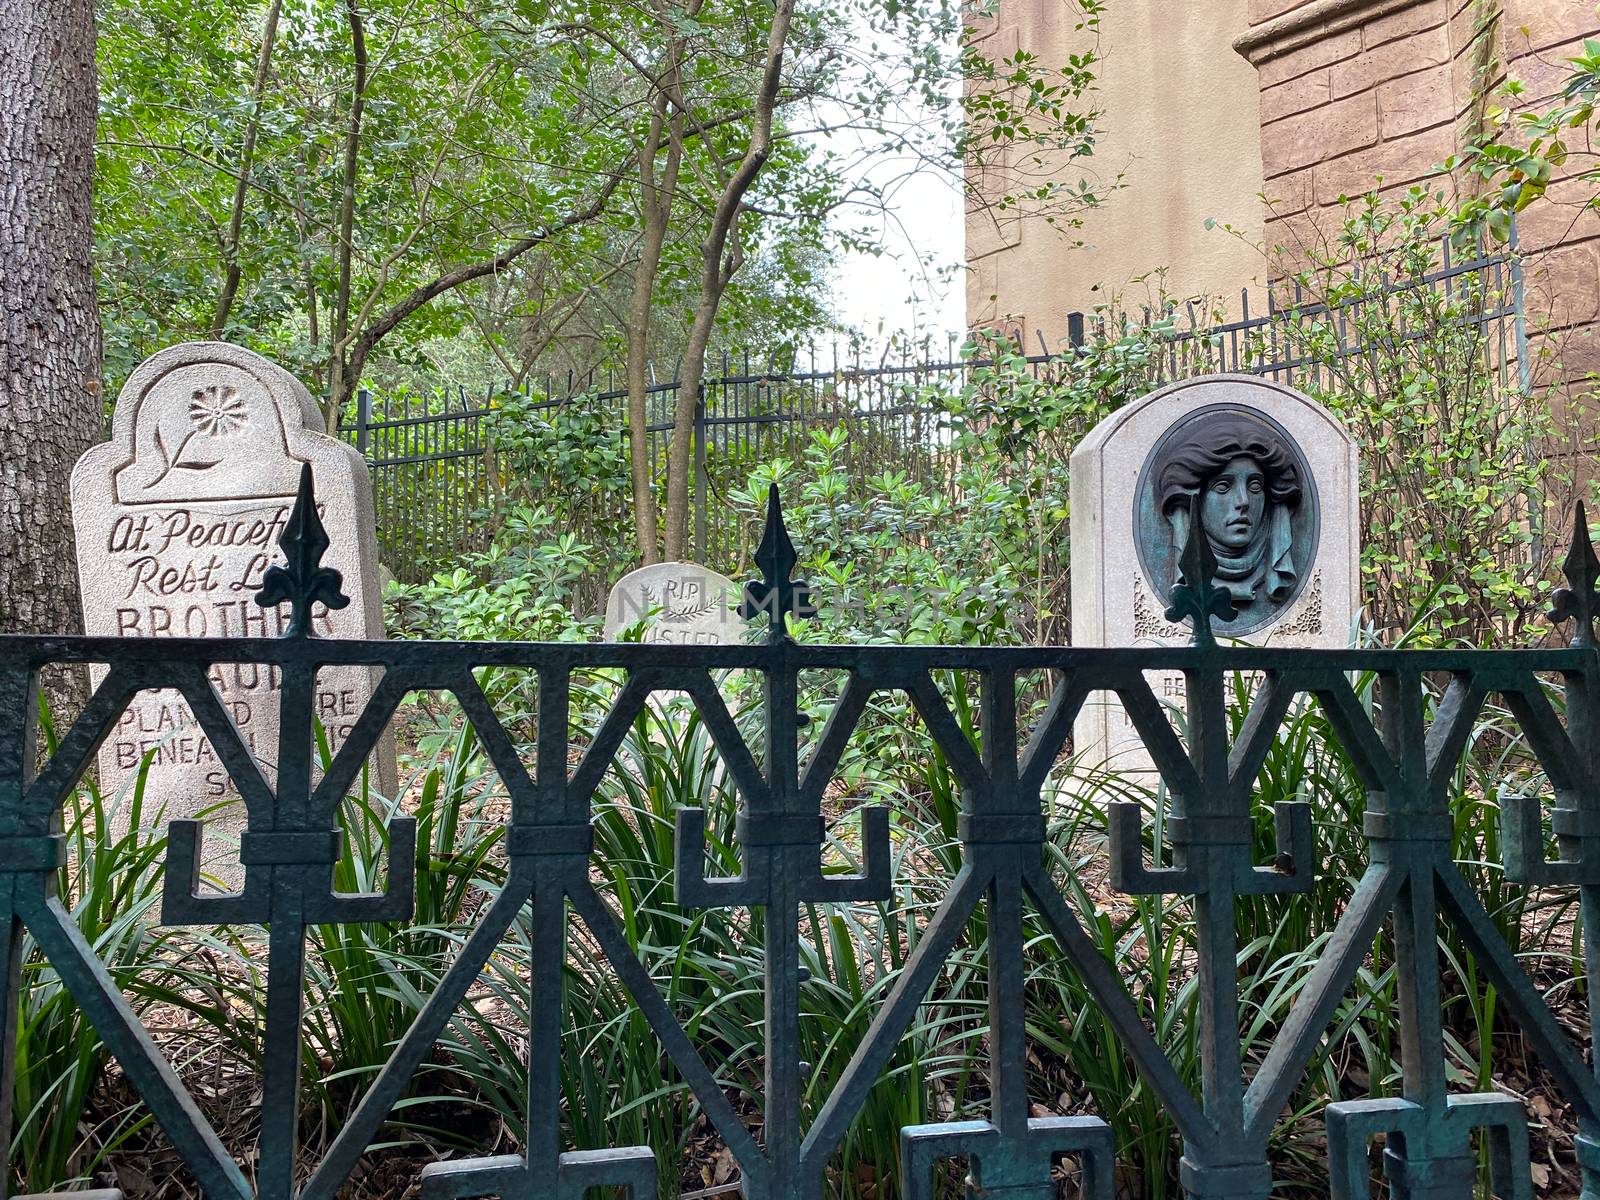 Orlando,FL/USA-10/21/20: The grave markers outside of the Haunted Mansion ride in the Magic Kingdom at  Walt Disney World Resorts in Orlando, FL.